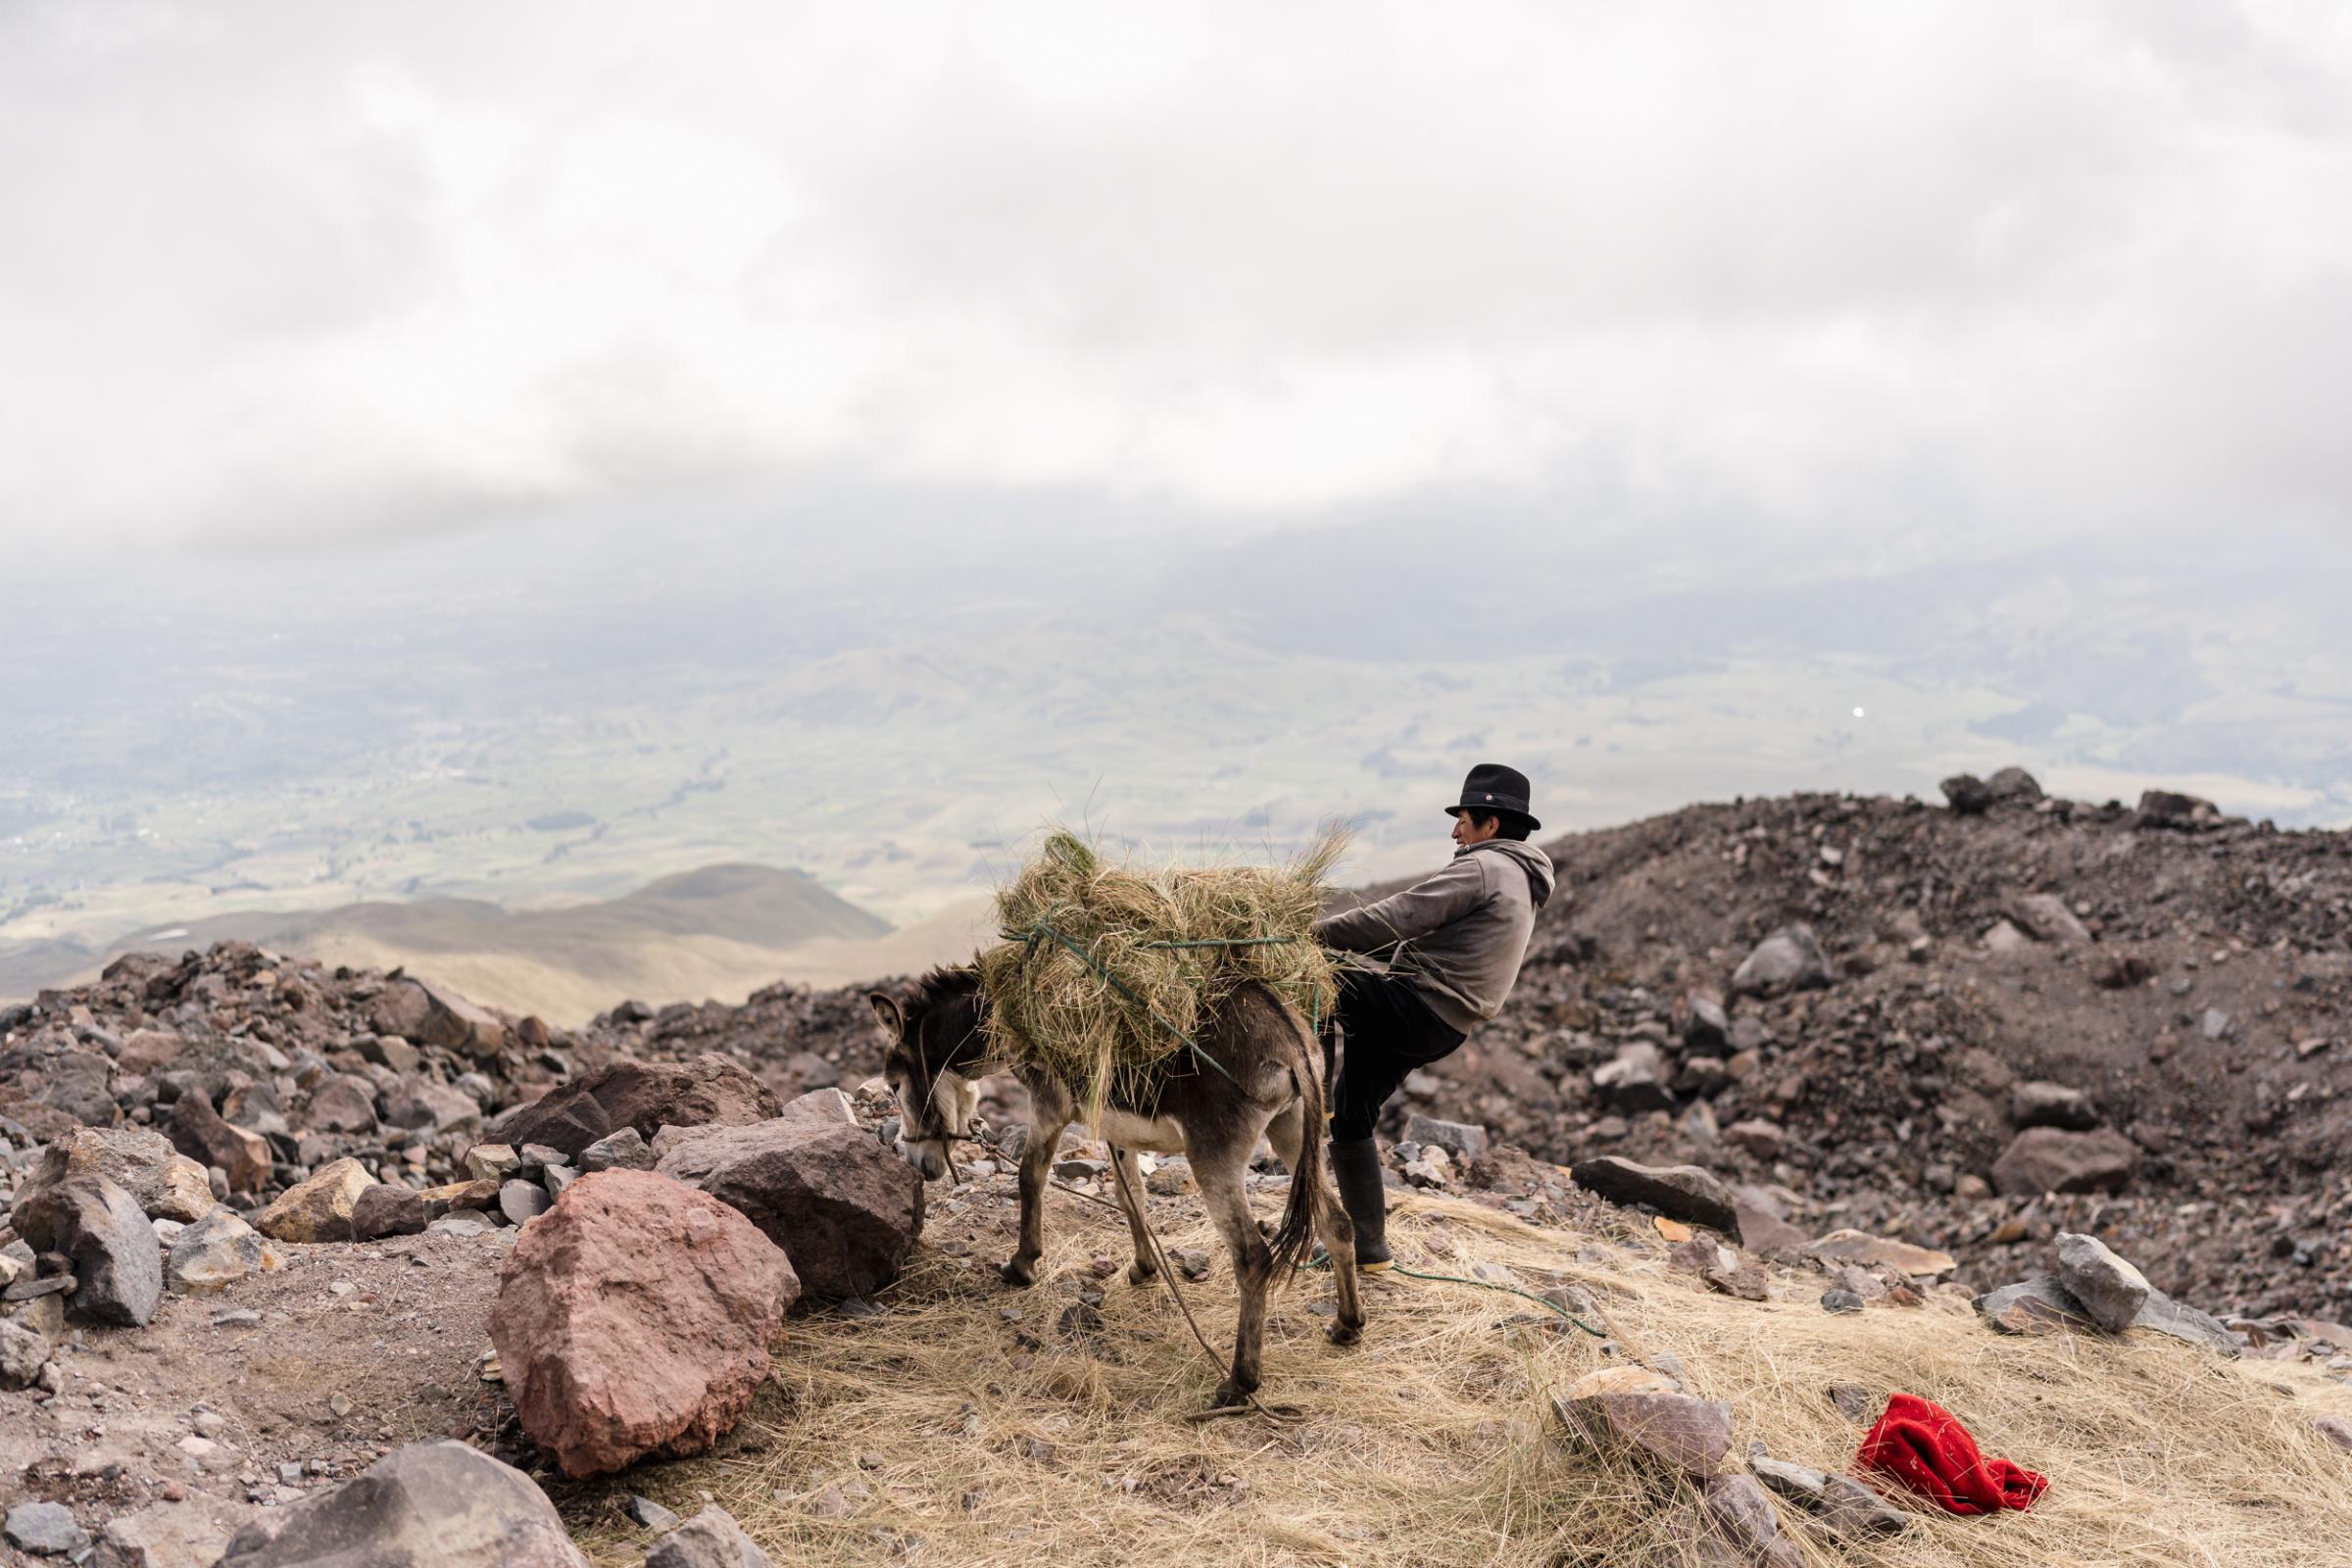 The Last Ice Merchant - Using the tall Paramo grasses he harvested earlier in the...